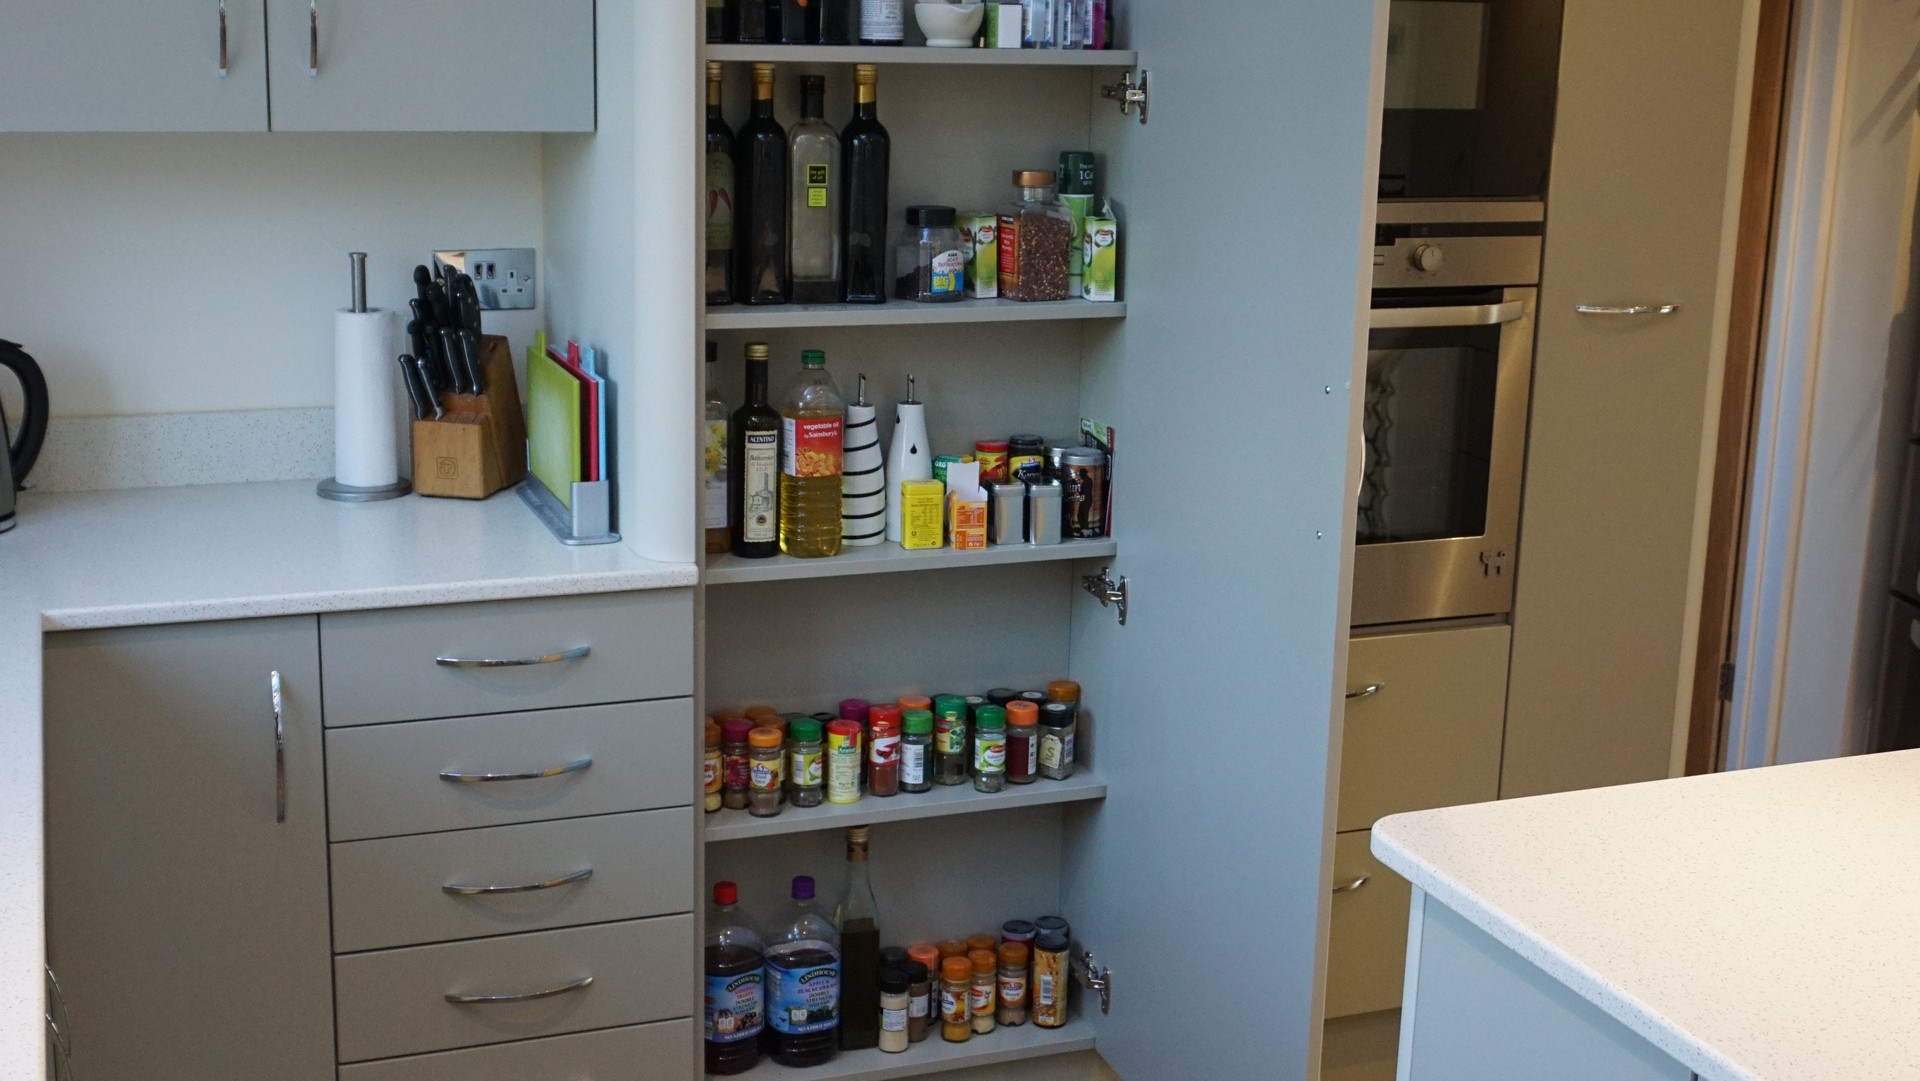 Completed works - Reduced depth tower cabinet with shelves for bottles, herbs and spices